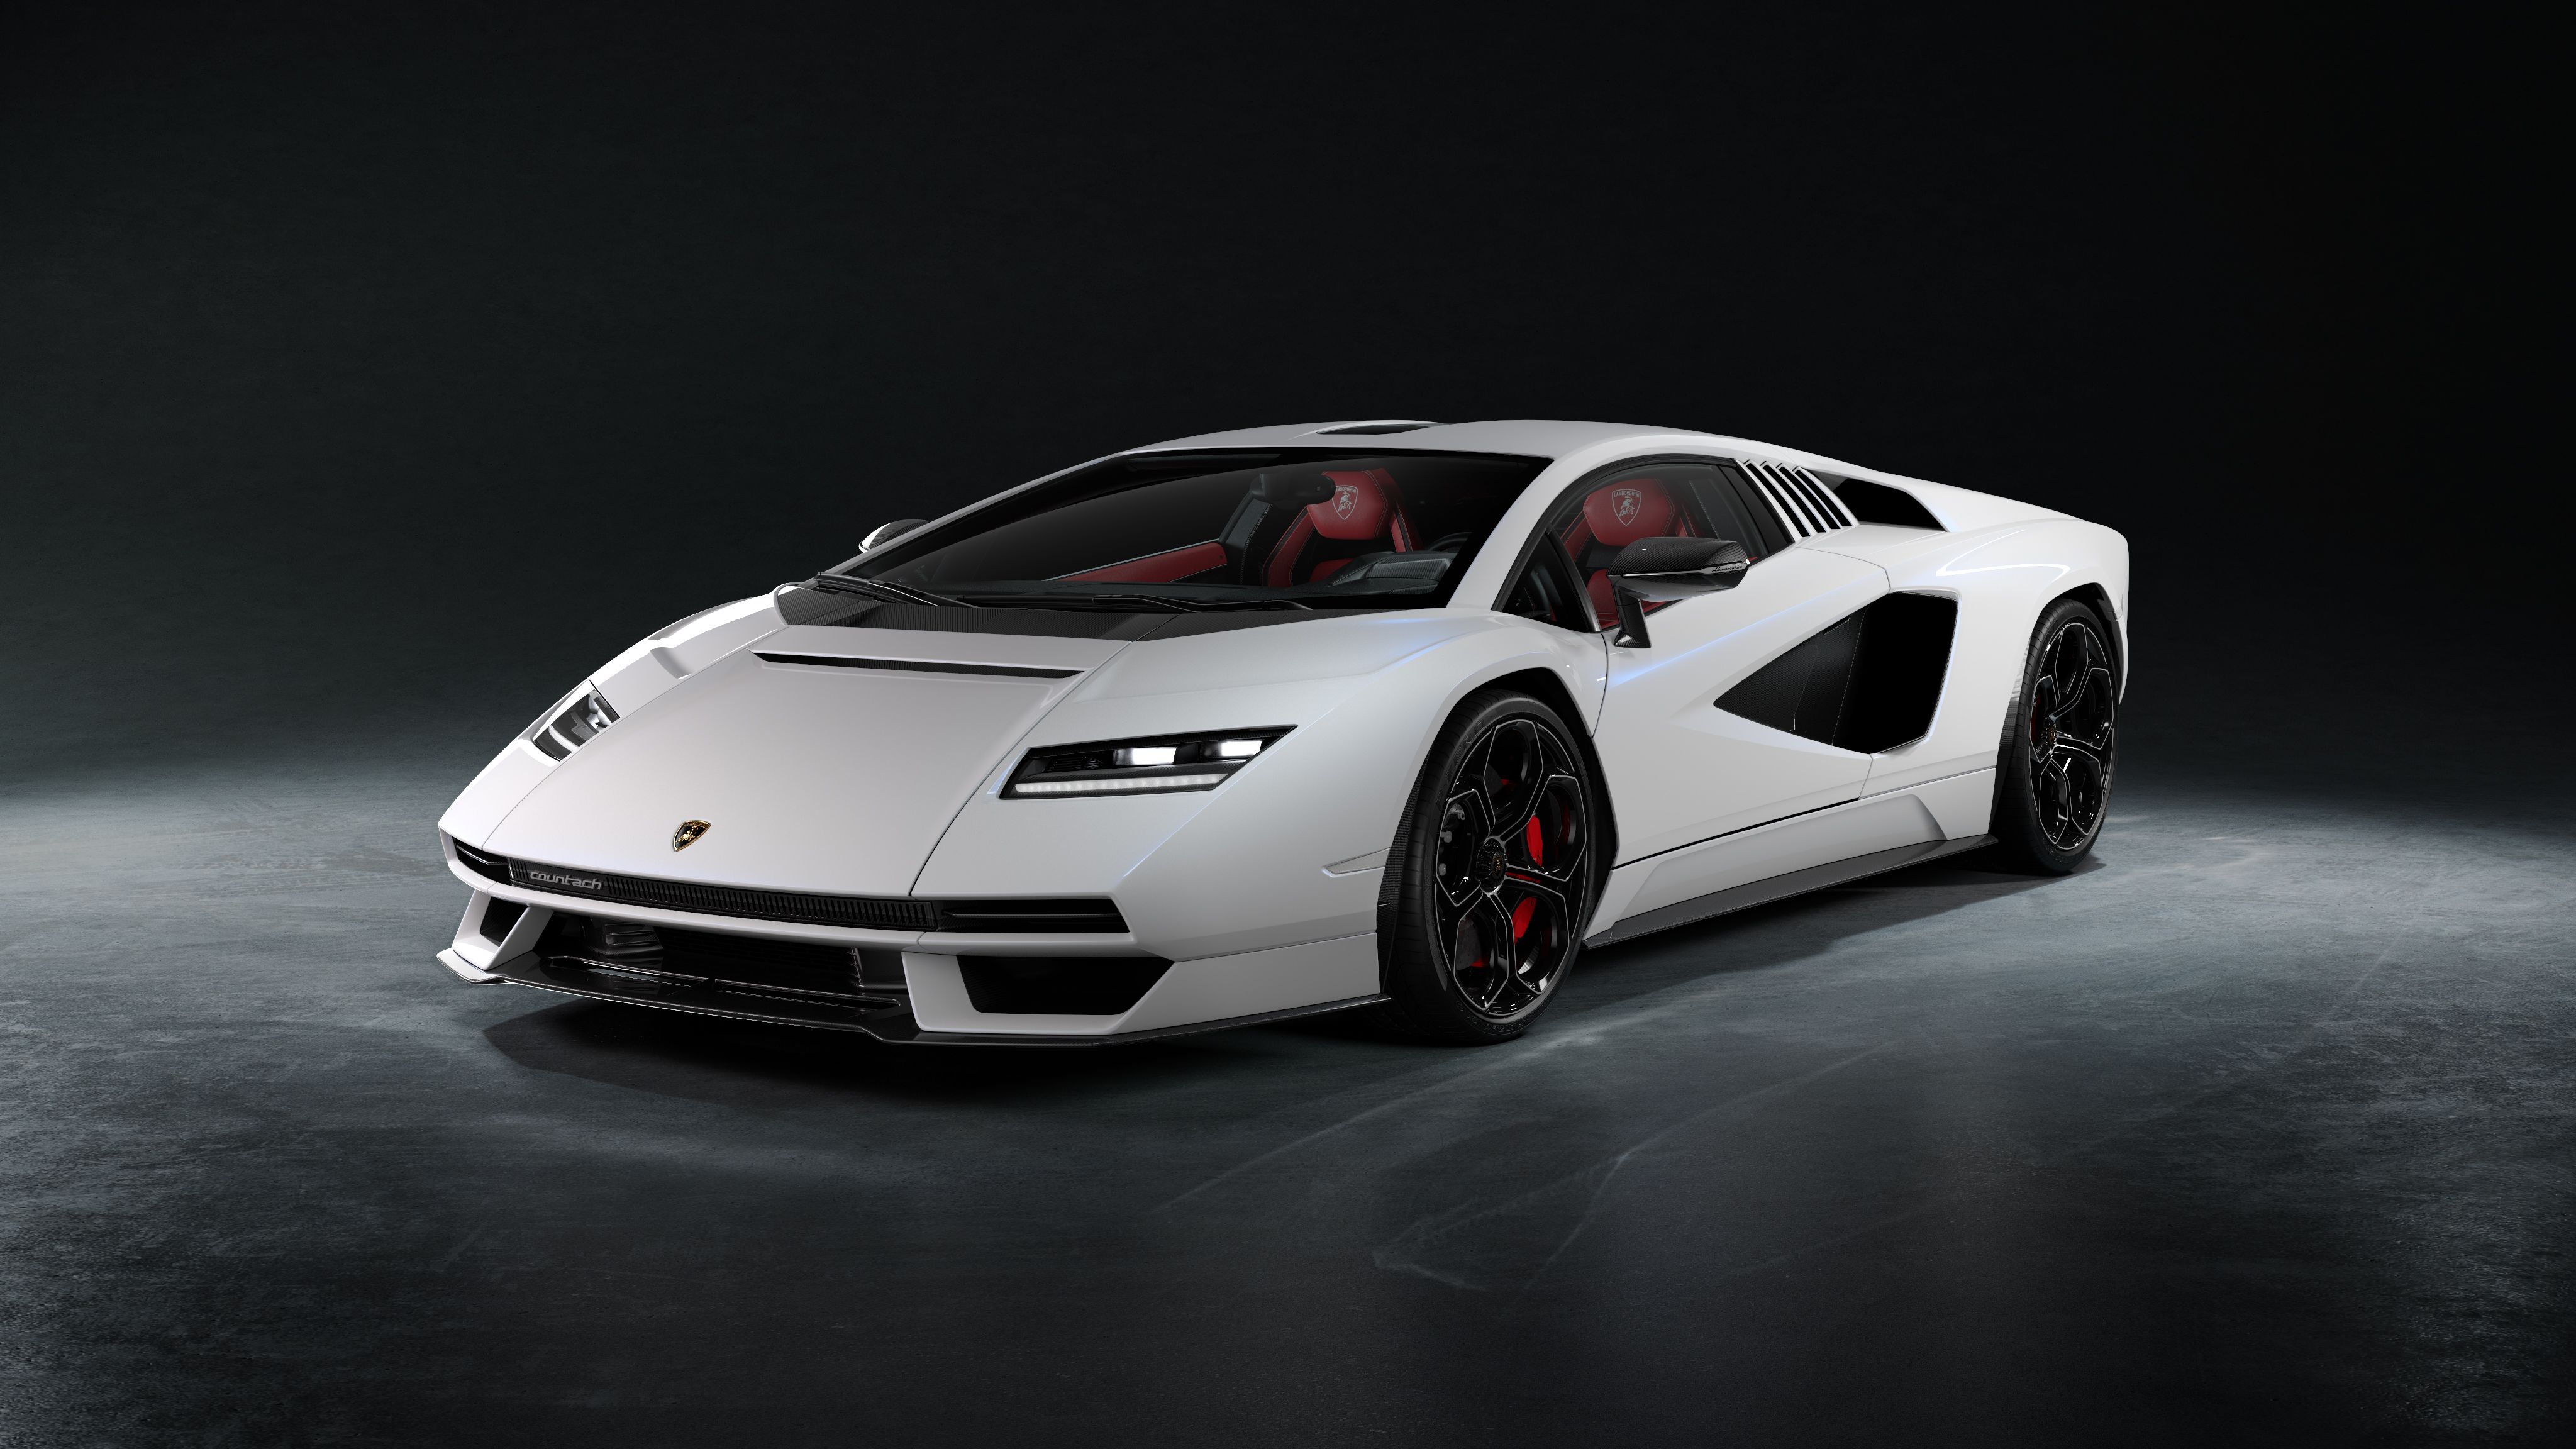 Lamborghini Cars and SUVs: Reviews, Pricing, and Specs